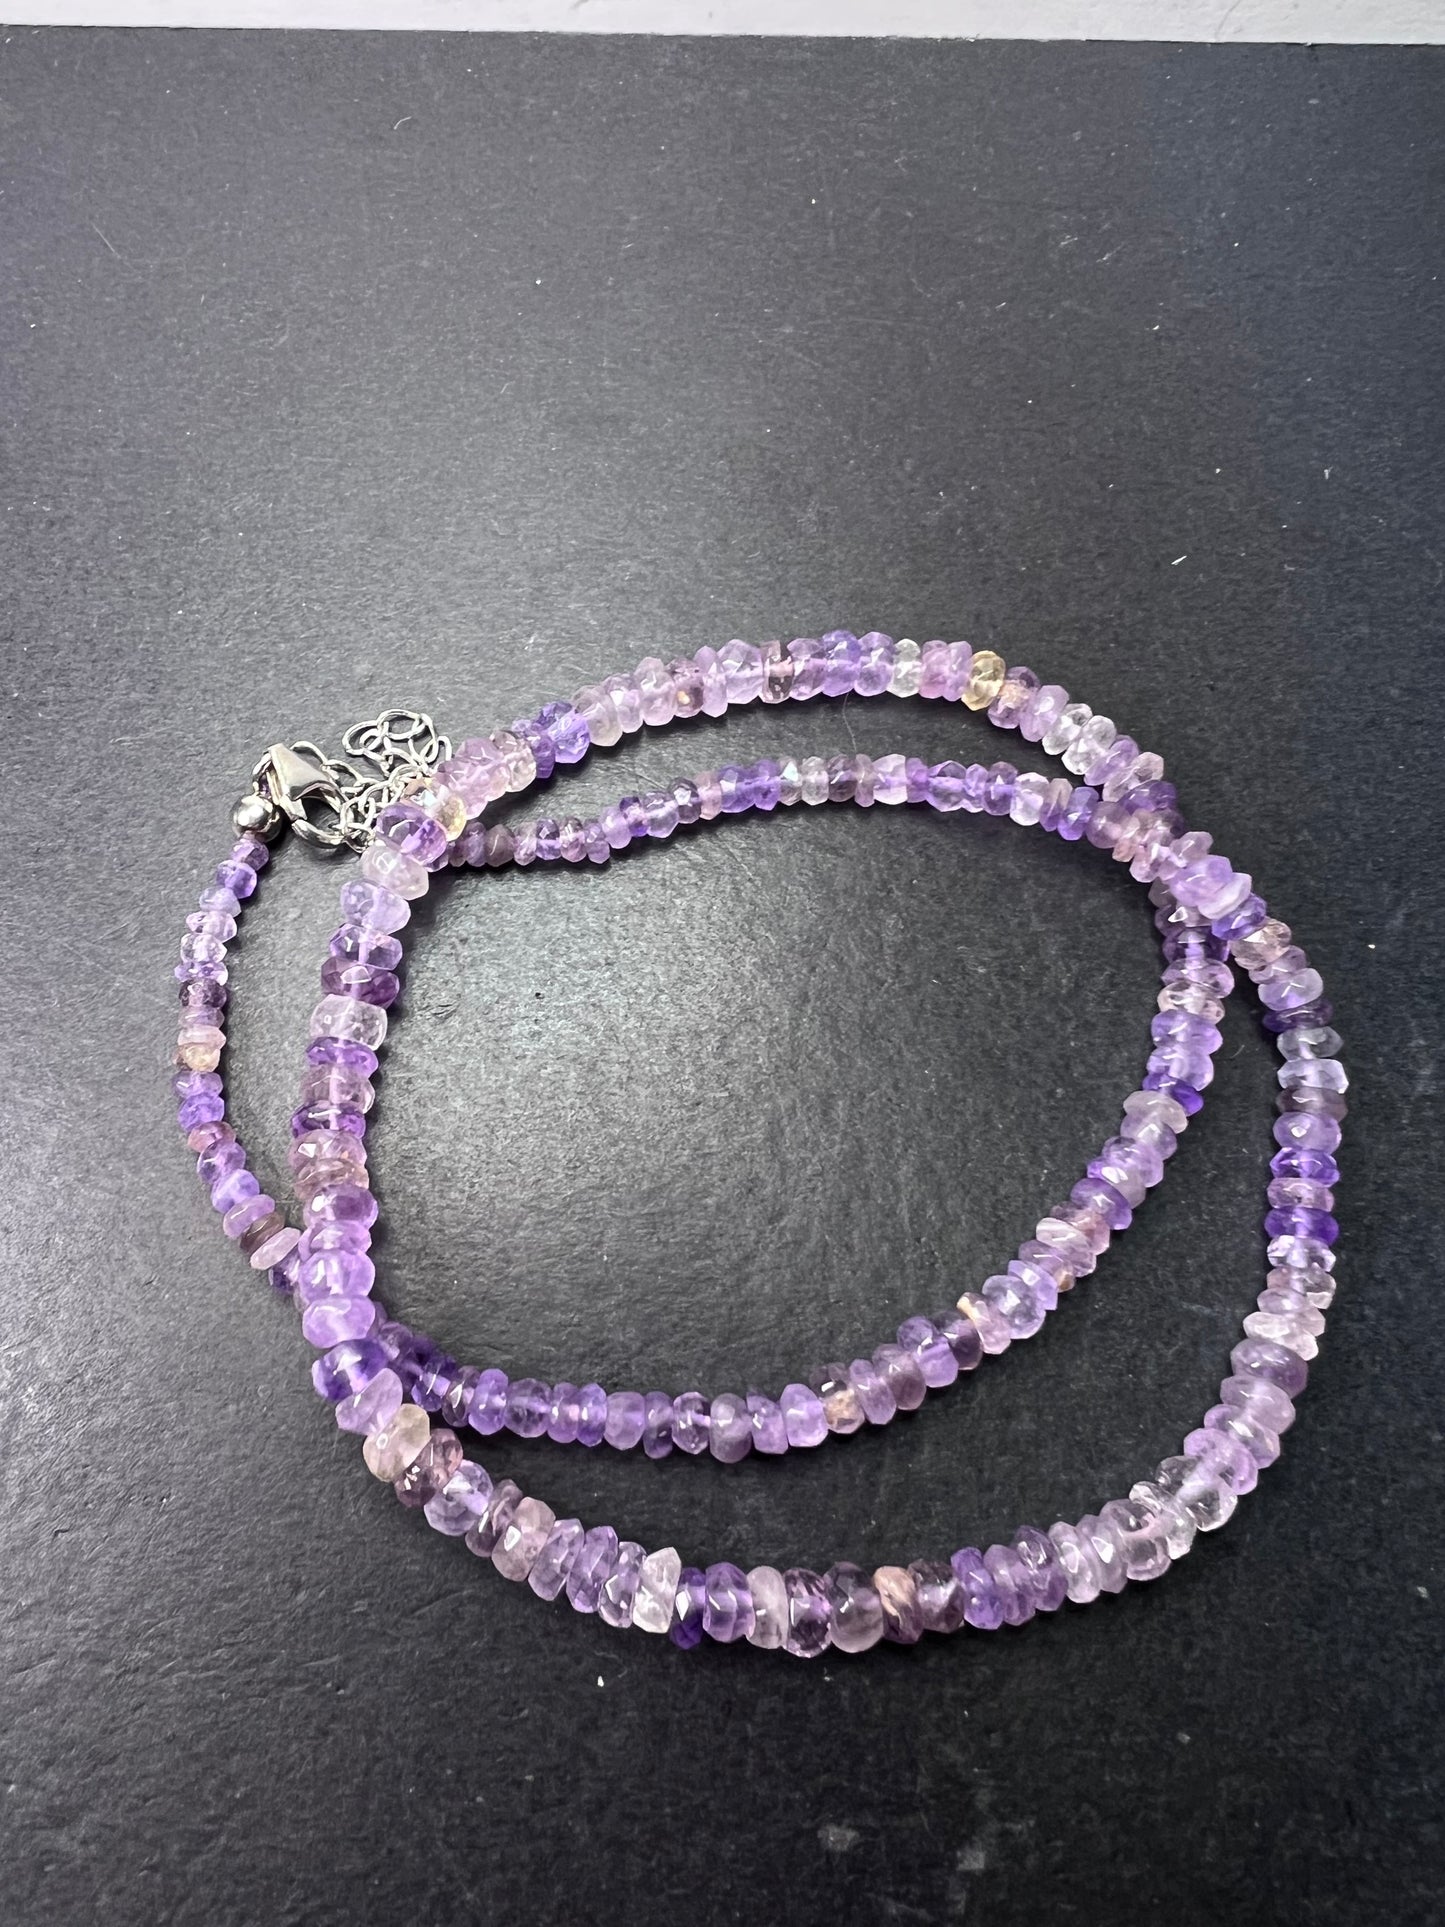 *NEW* Ametrine necklace with sterling silver clasp